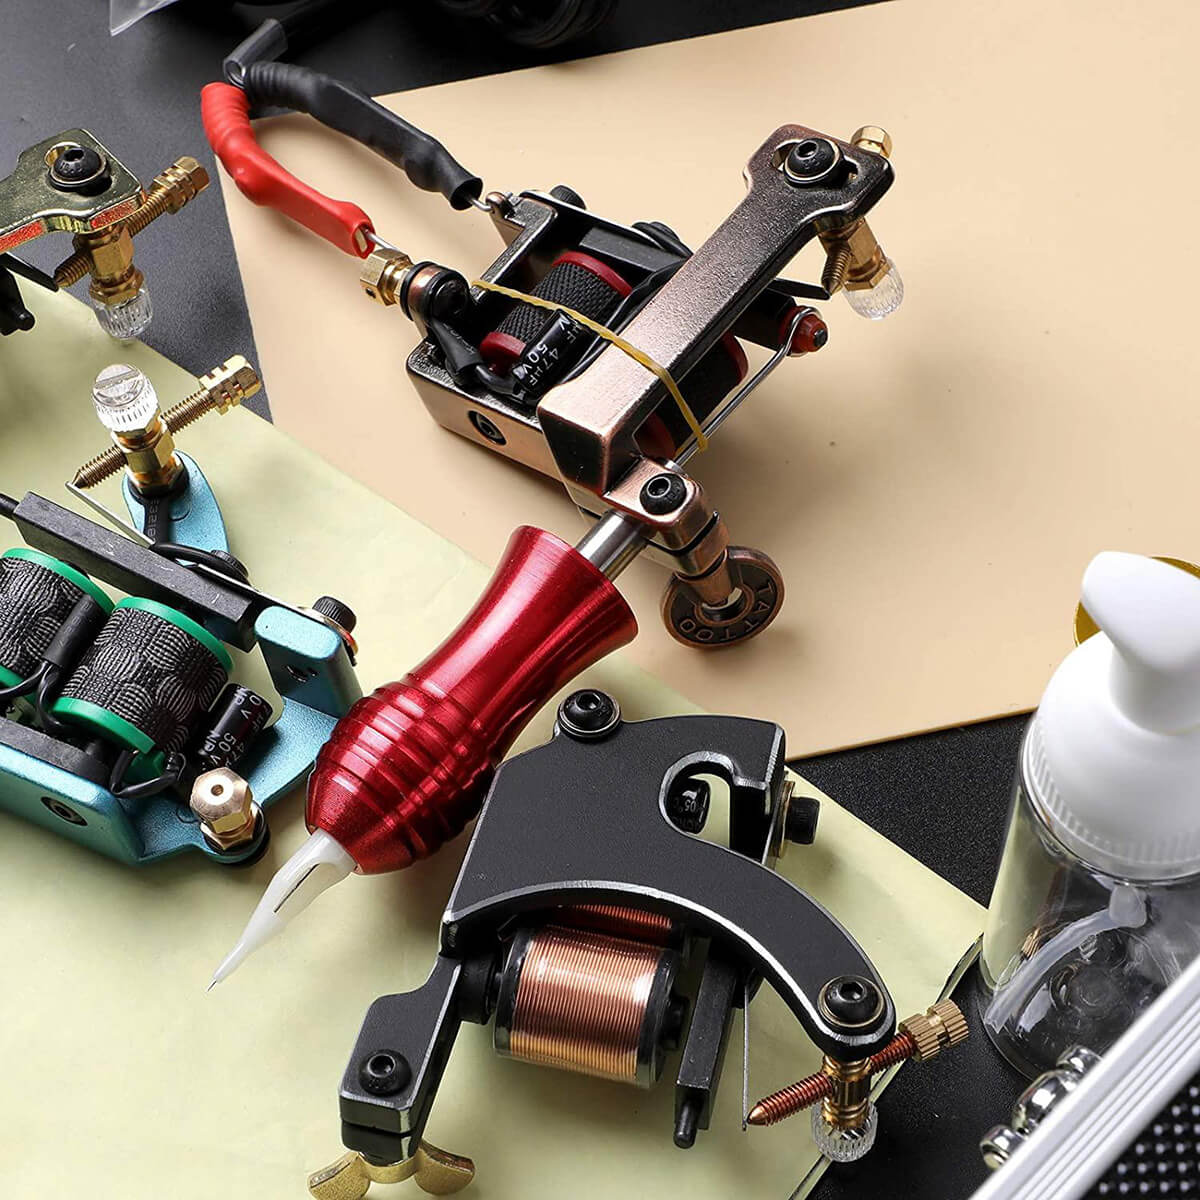 What is the development of tattoo machines?